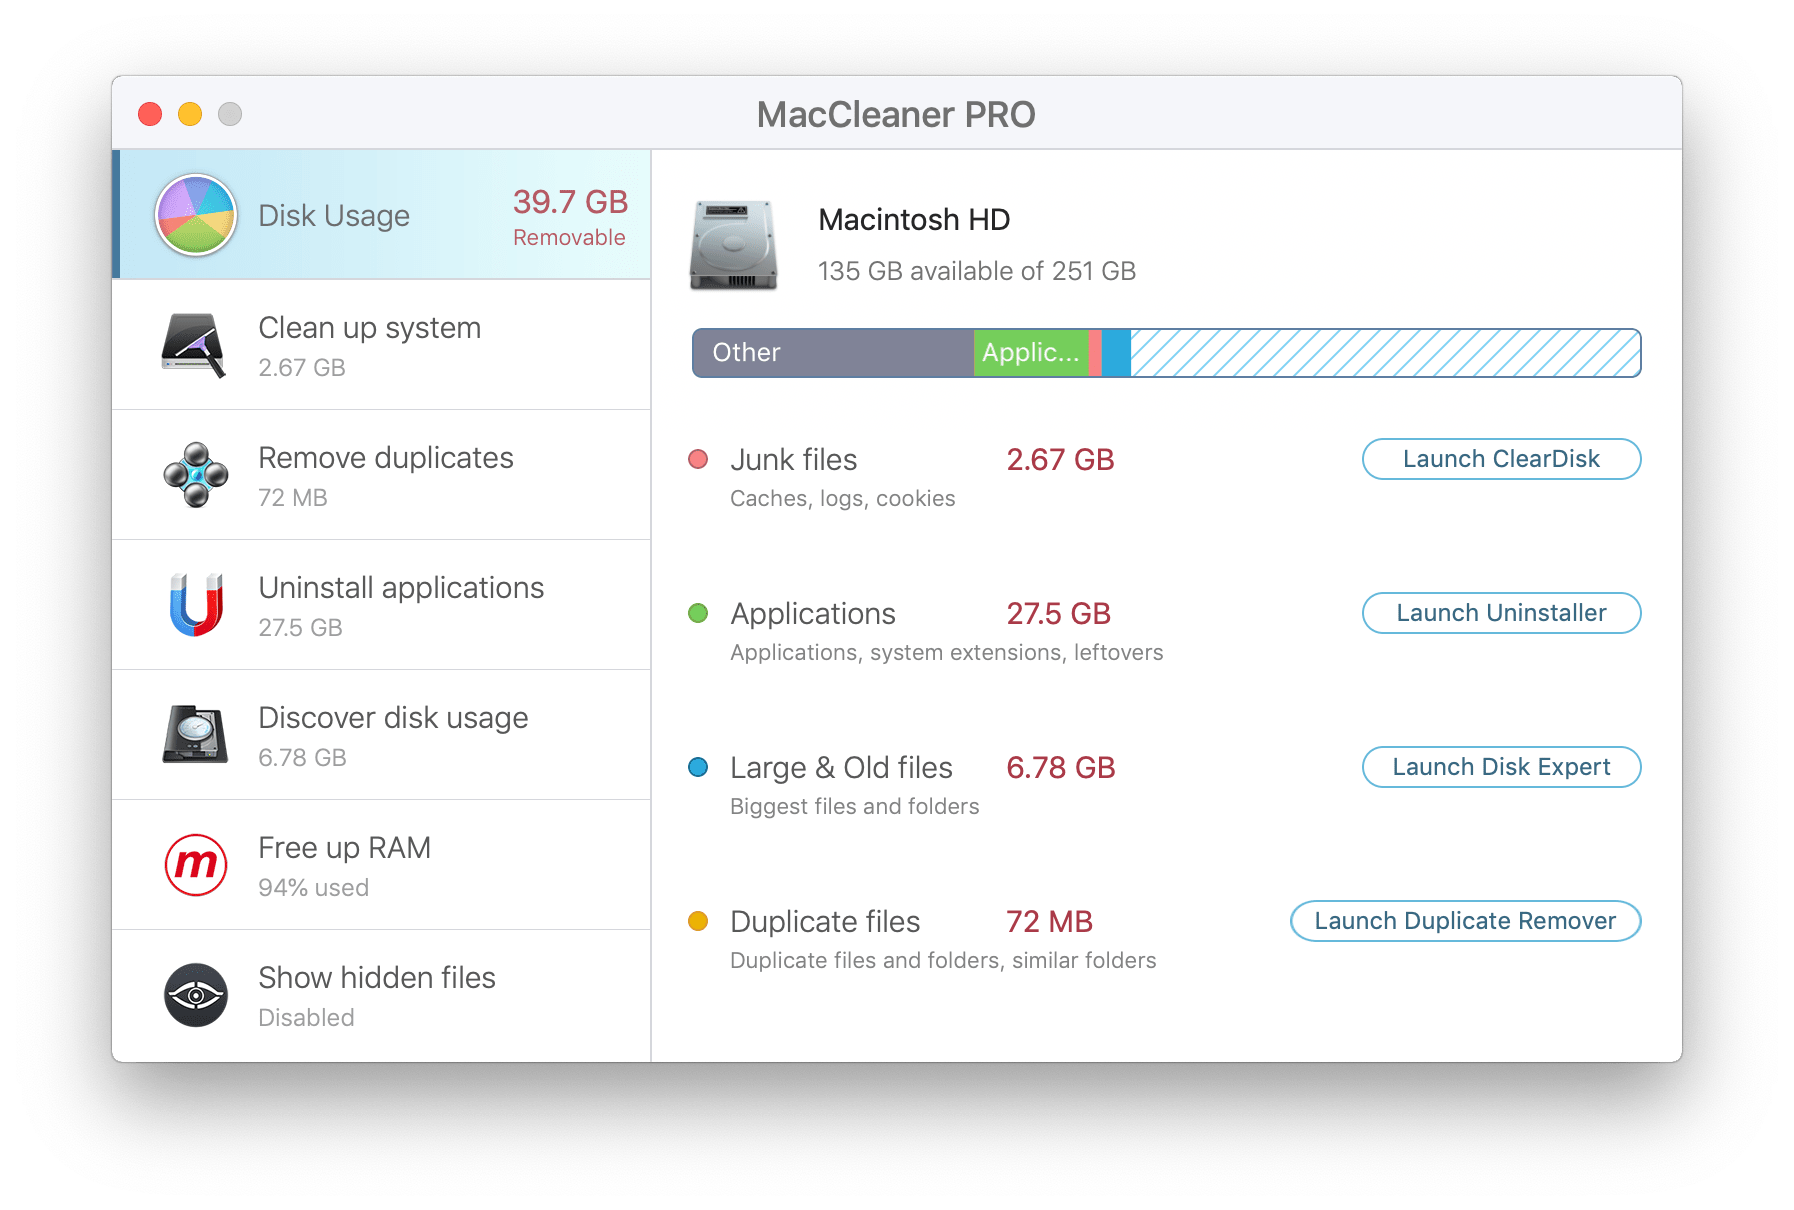 instal the new version for mac PC Cleaner Pro 9.3.0.2